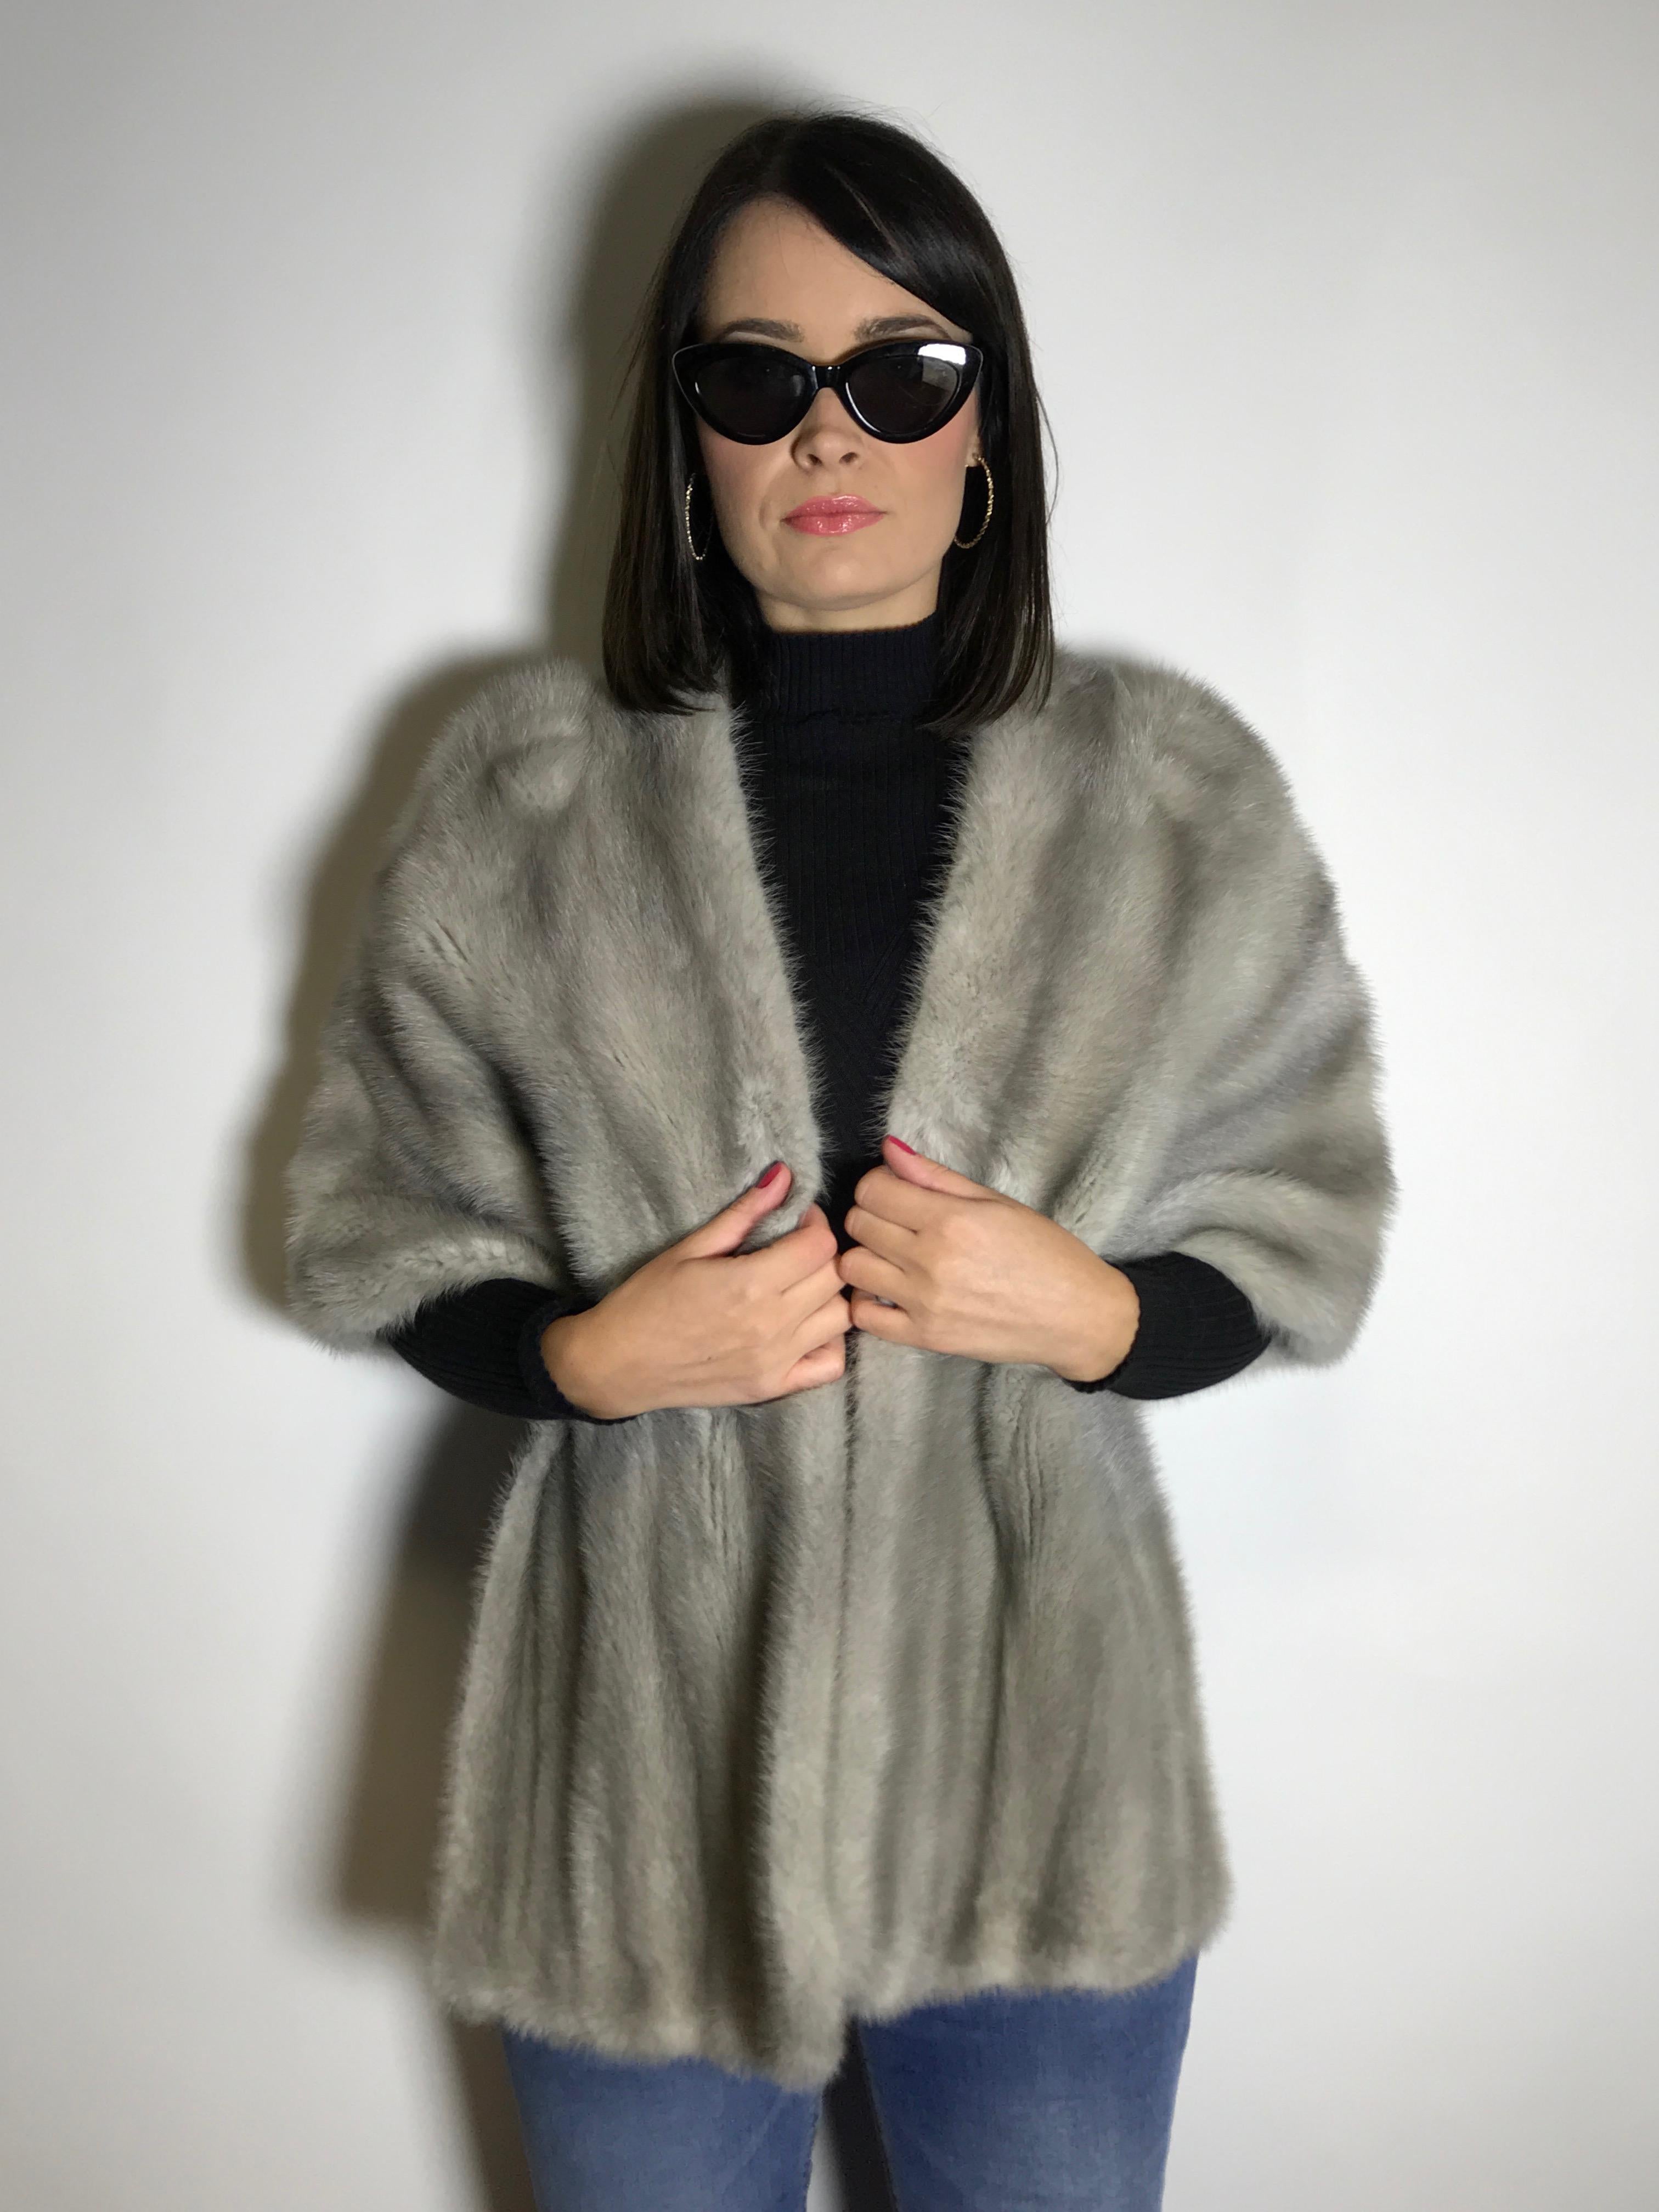 Beautiful sapphire Mink cape.
Exclusively made by Wenzel. 
First-class furrier making with silky soft furs, an absolute dream piece.

Size EU: one-size / S-L
Total length: 70 cm
Shoulder width: circa 44 cm

The cape is in excellent condition, almost